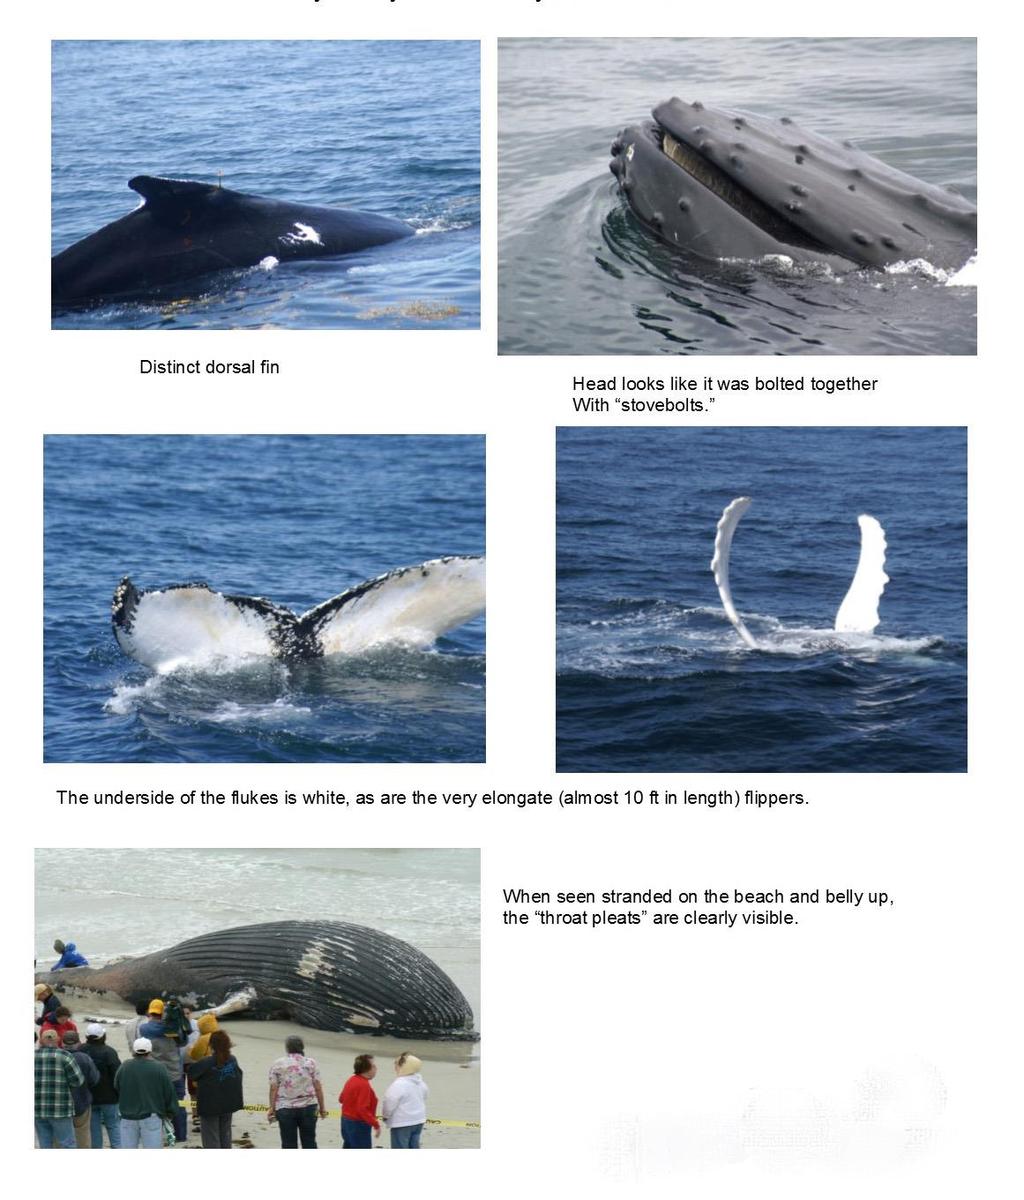 Figure C12. Distinguishing features of humpback whales, also sighted in Florida waters.